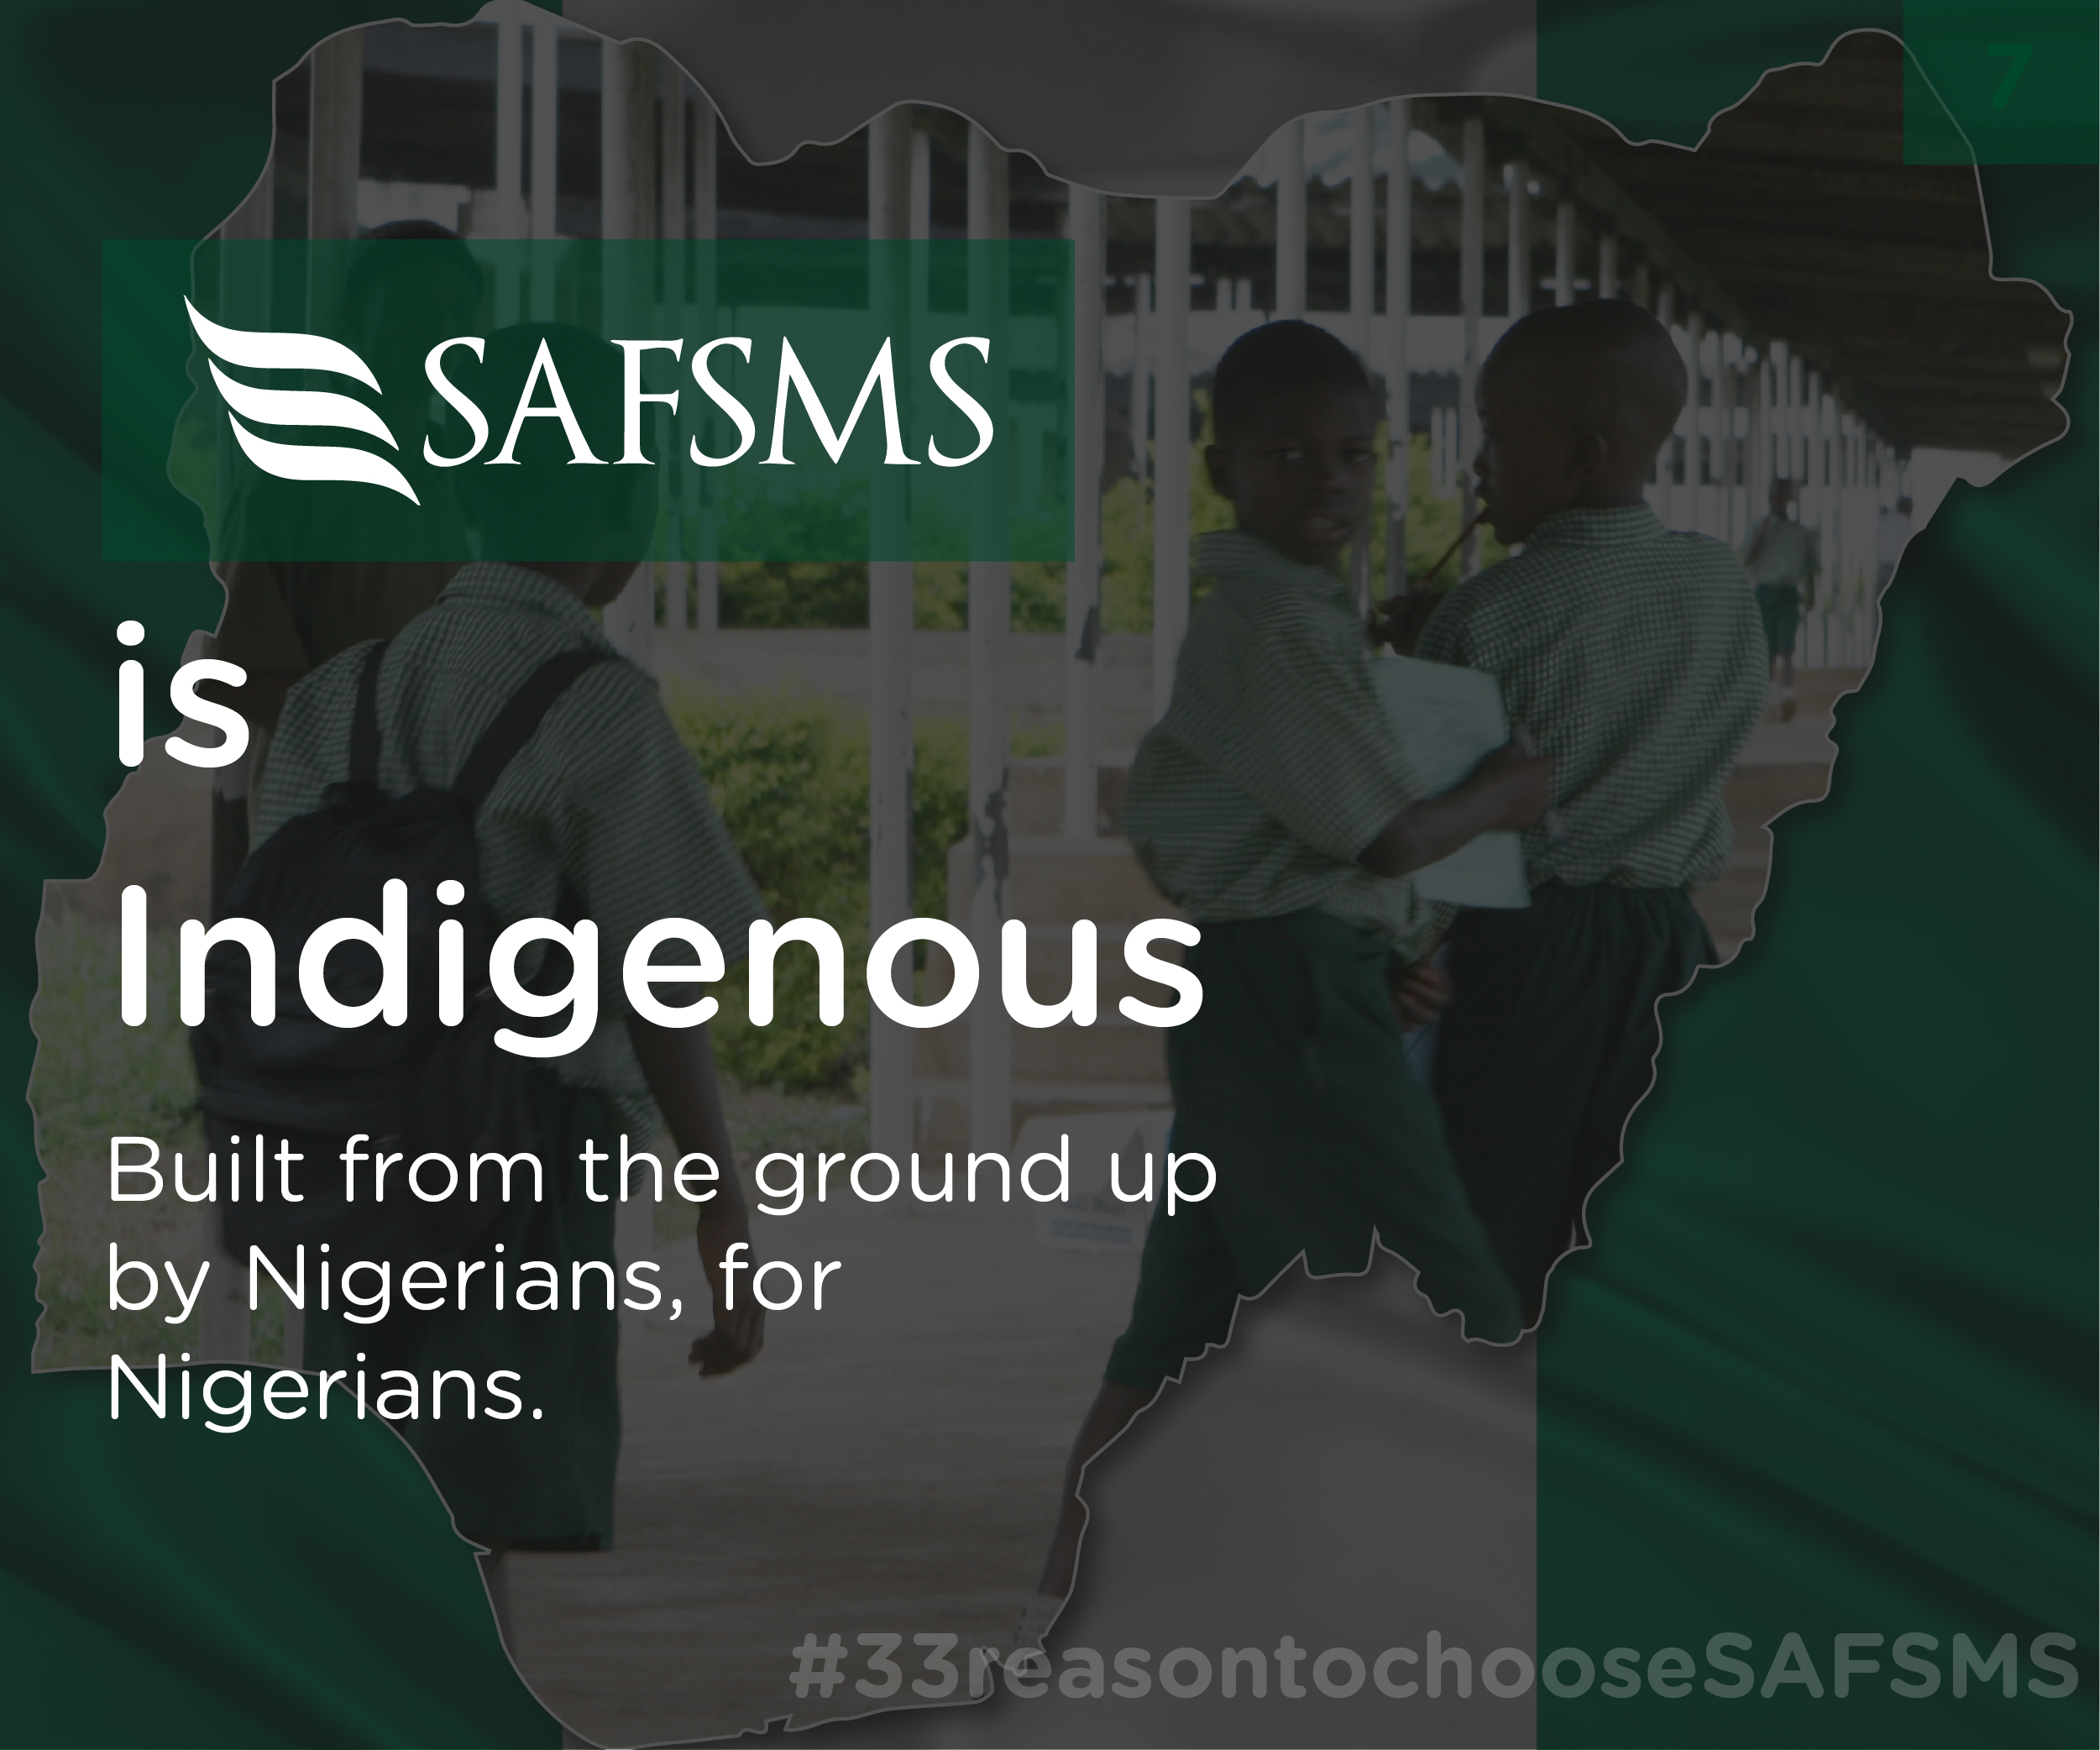 SAFSMS is Indigenous